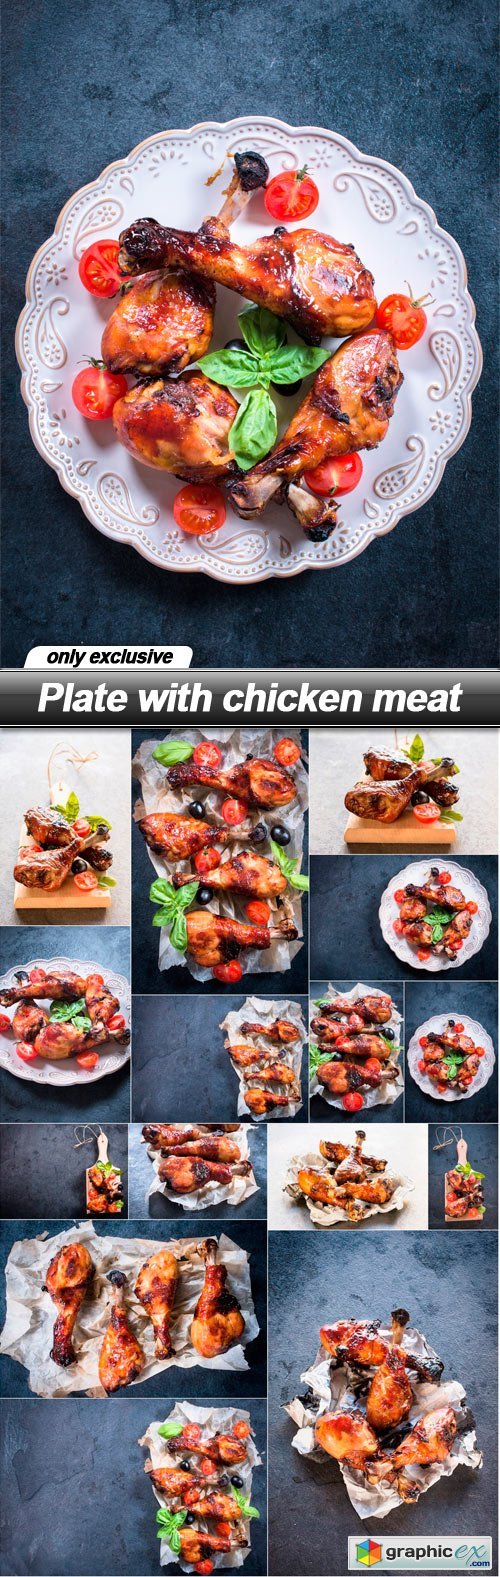 Plate with chicken meat - 15 UHQ JPEG